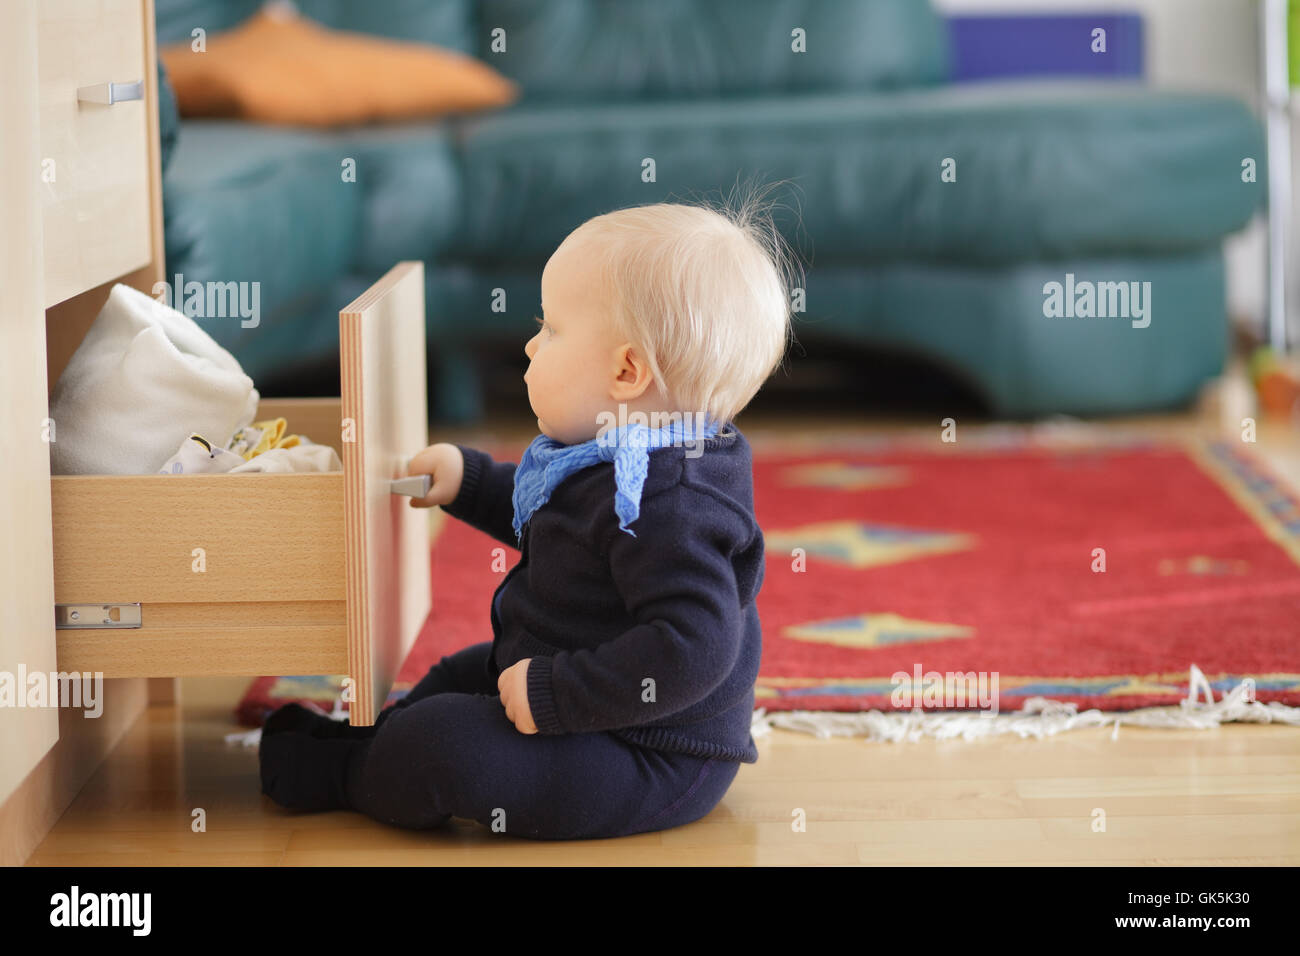 Little boy trying to open and look inside drawer chest. Stock Photo